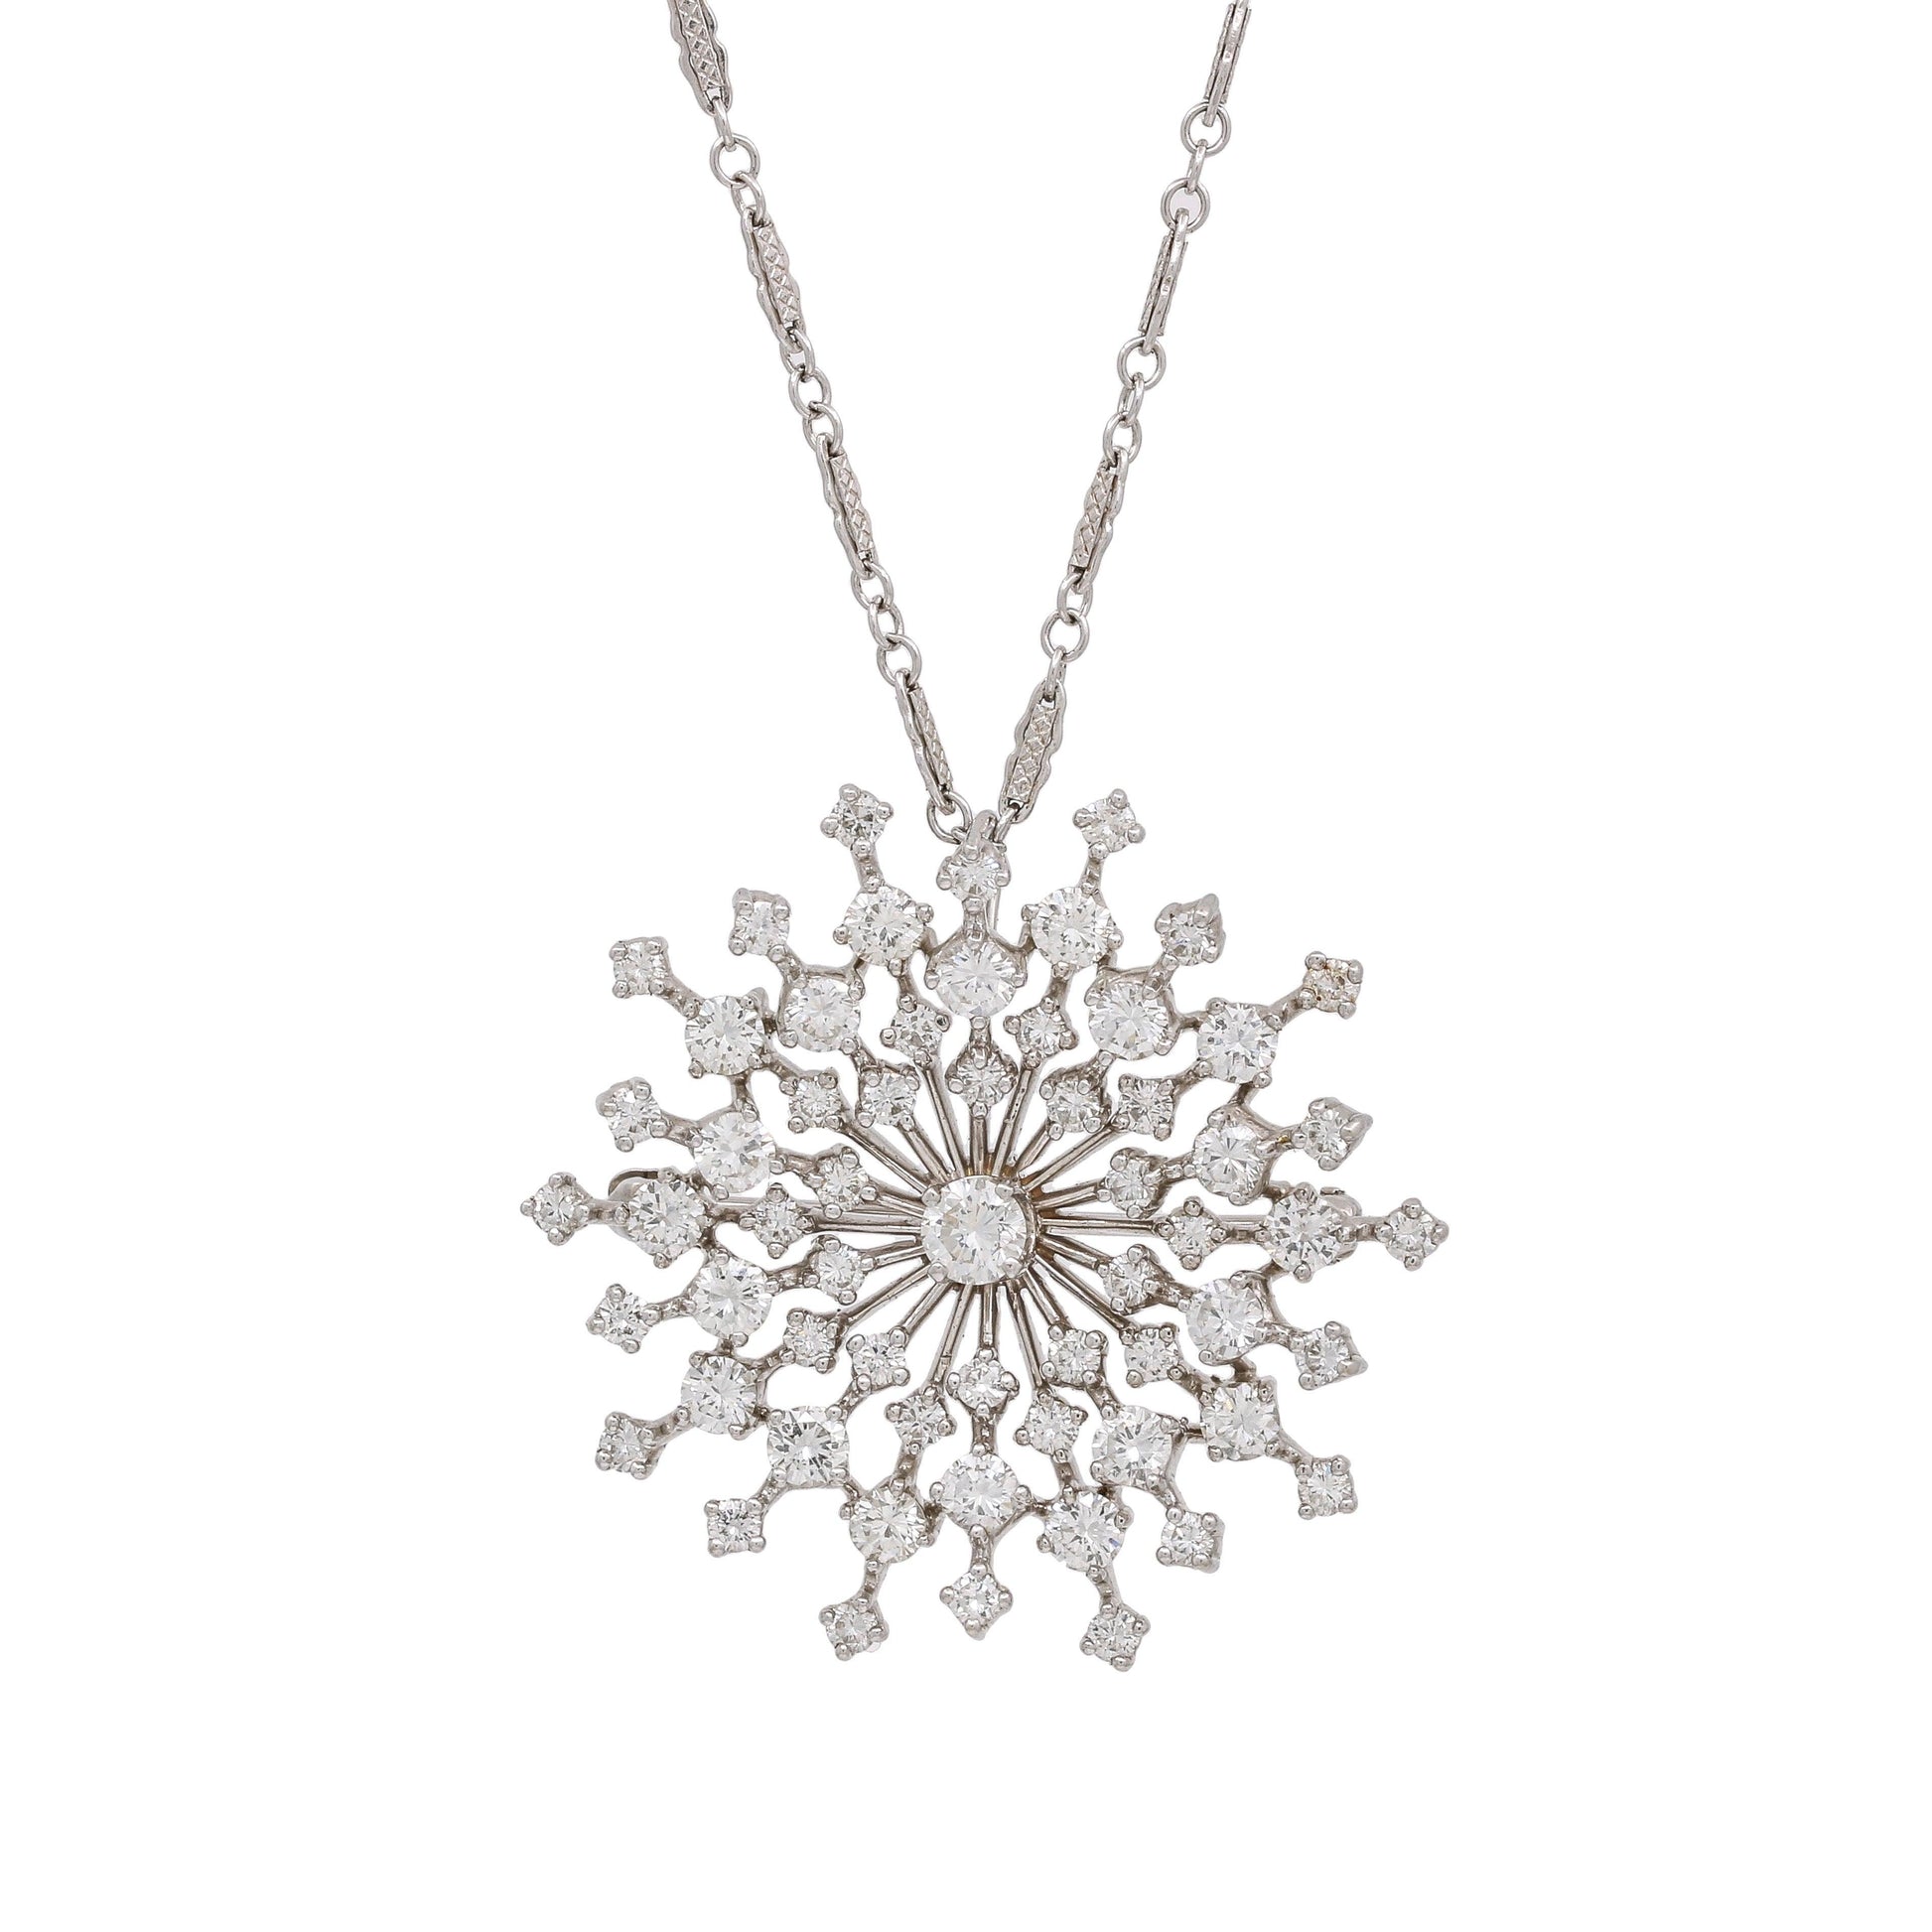 Diamond Starburst Brooch Pendant Necklace in 14k White Gold 3.95 cttw - 31 Jewels Inc.